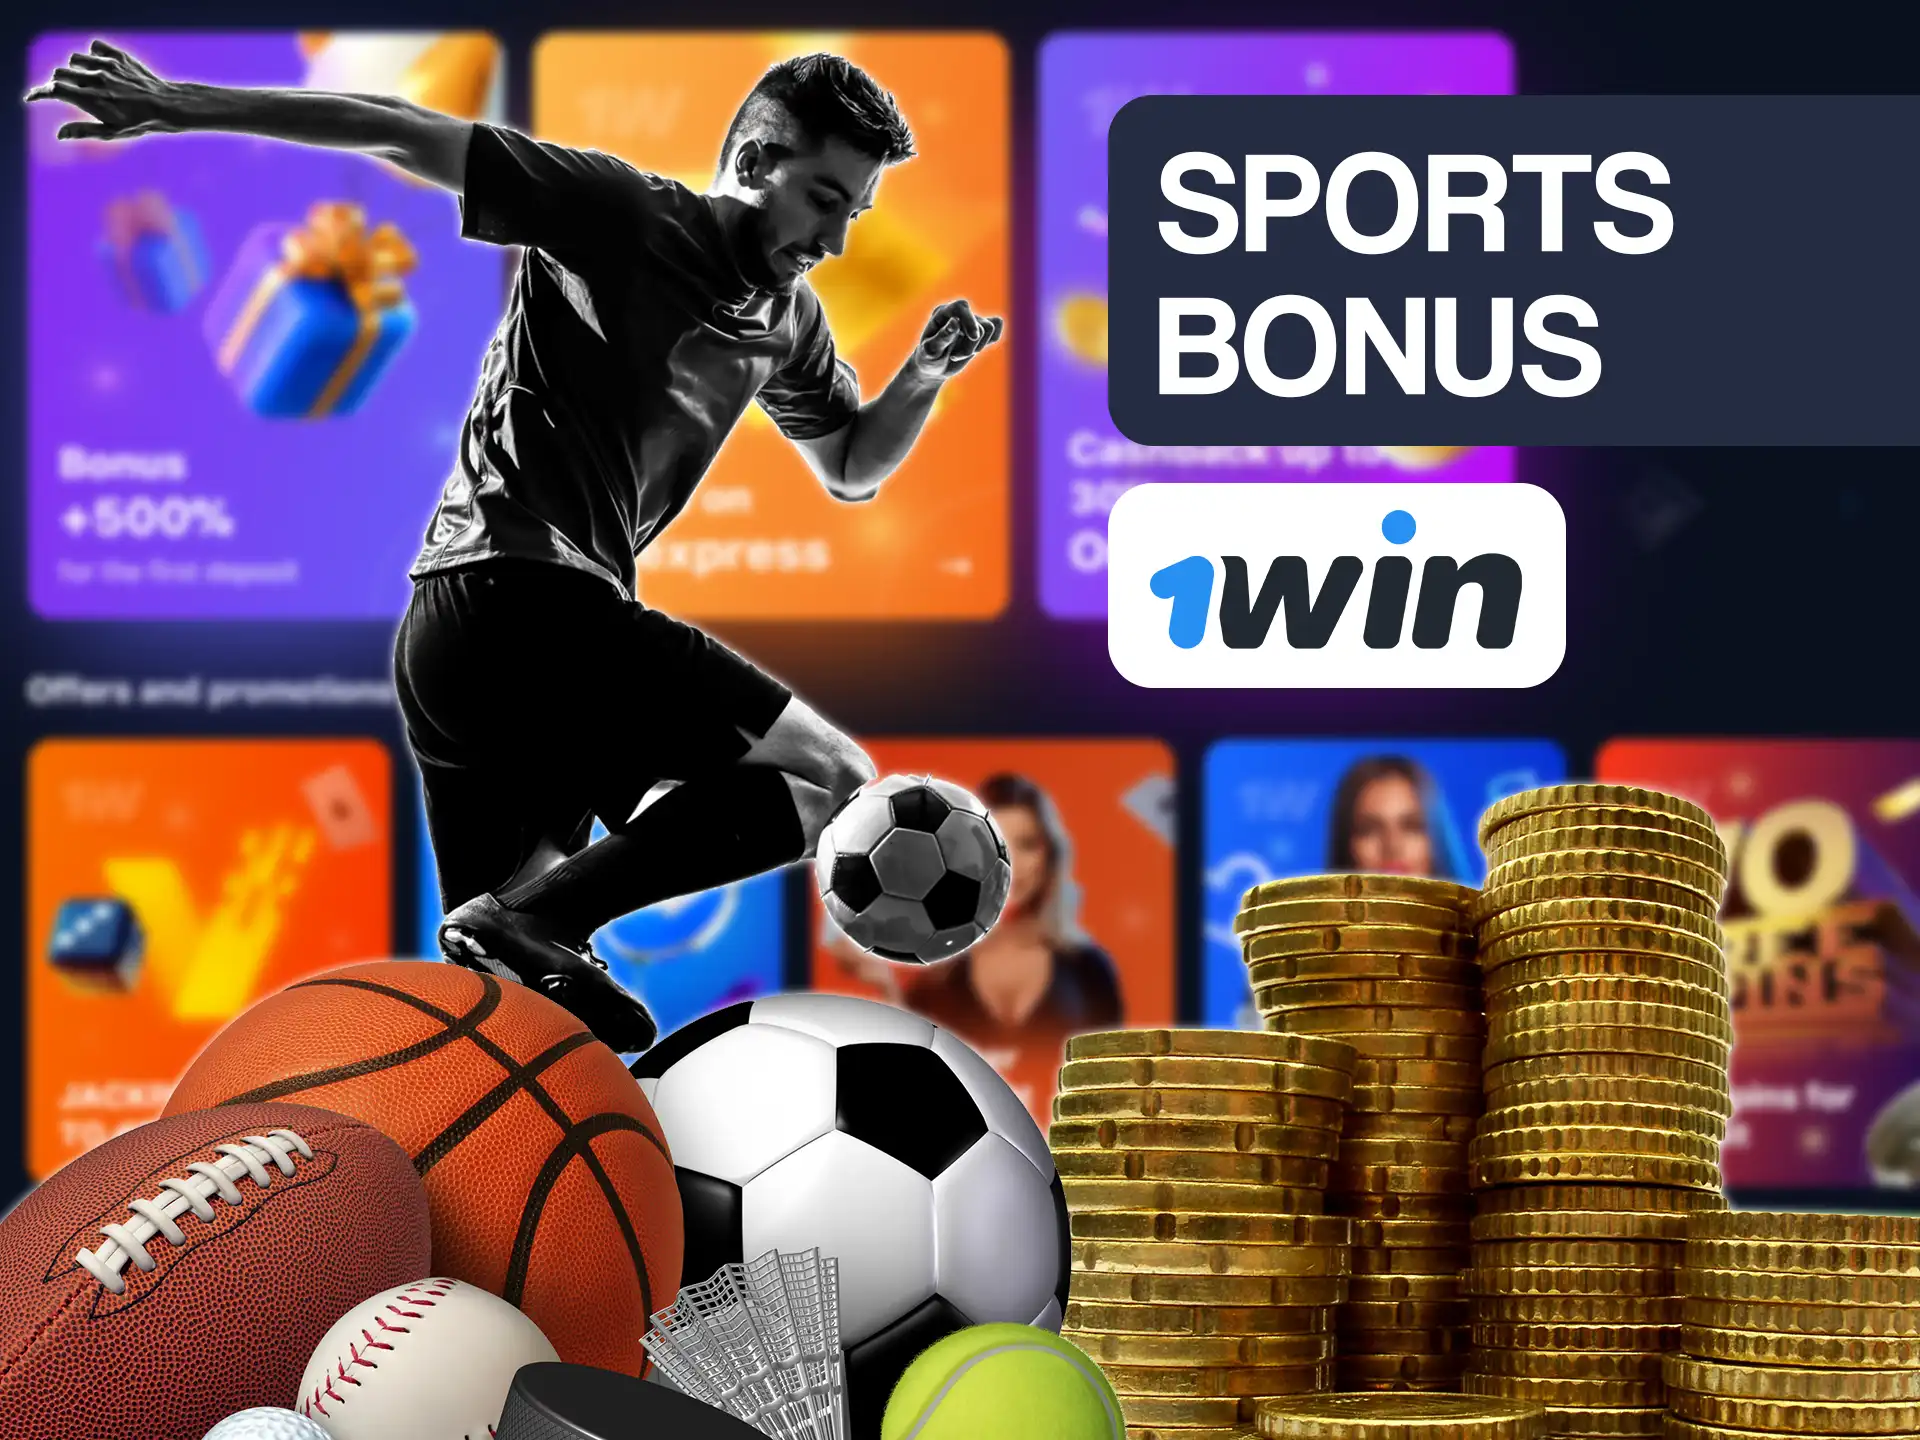 Bet on sports and get bonuses at 1win.